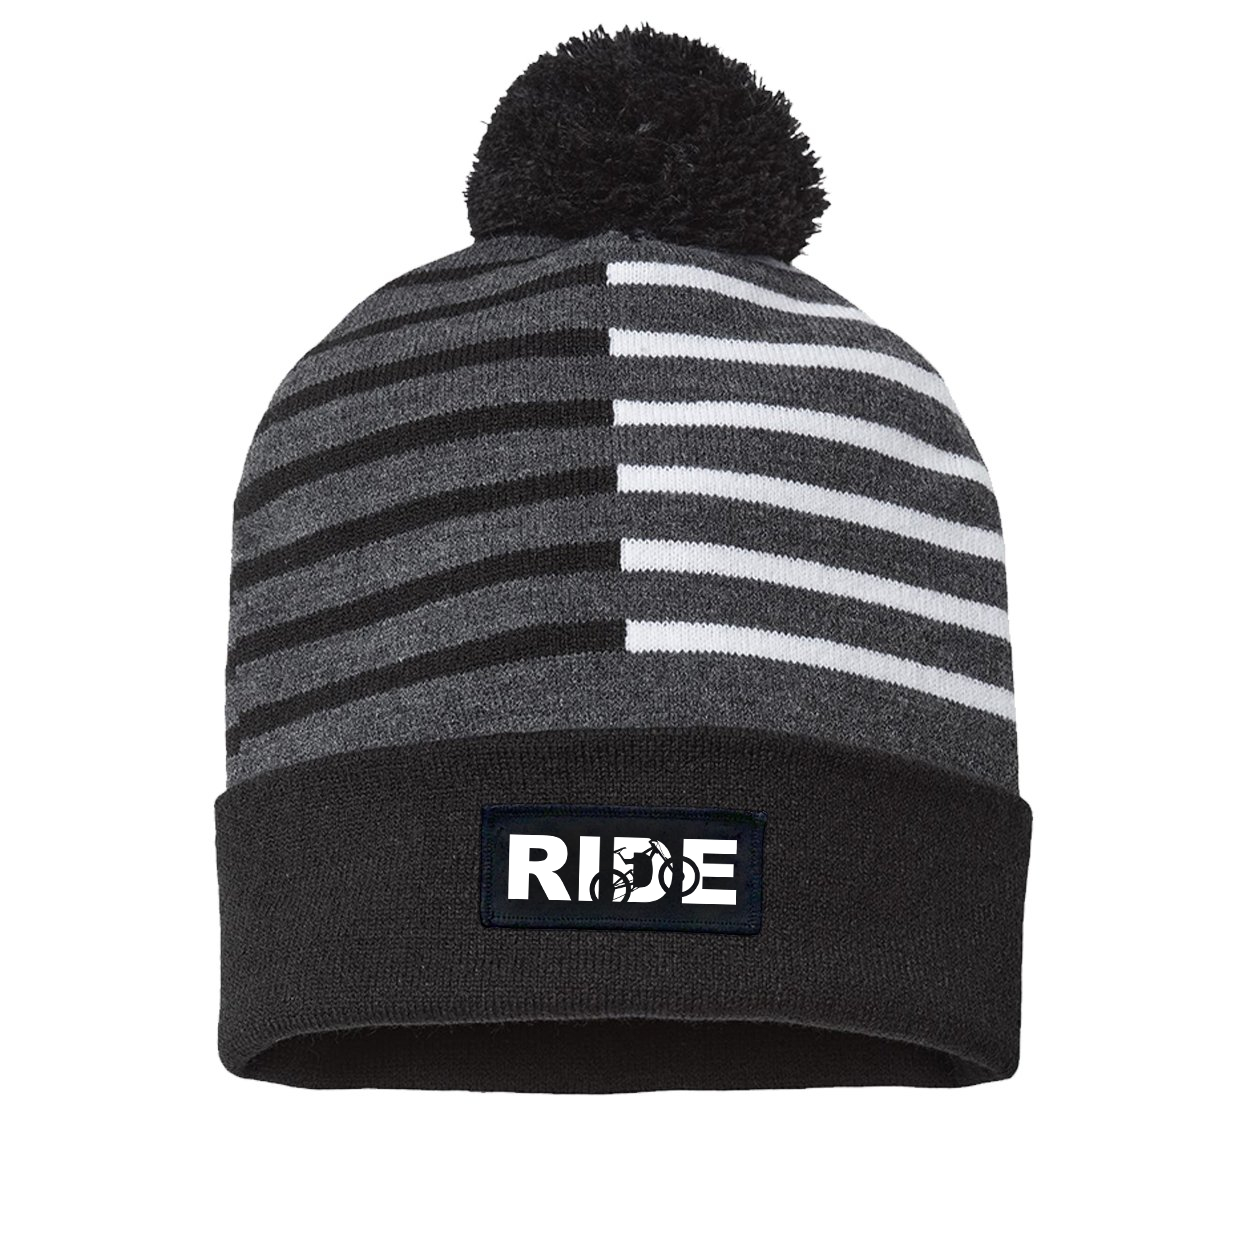 Ride MTB Logo Night Out Woven Patch Roll Up Pom Knit Beanie Half Color Black/White (White Logo)